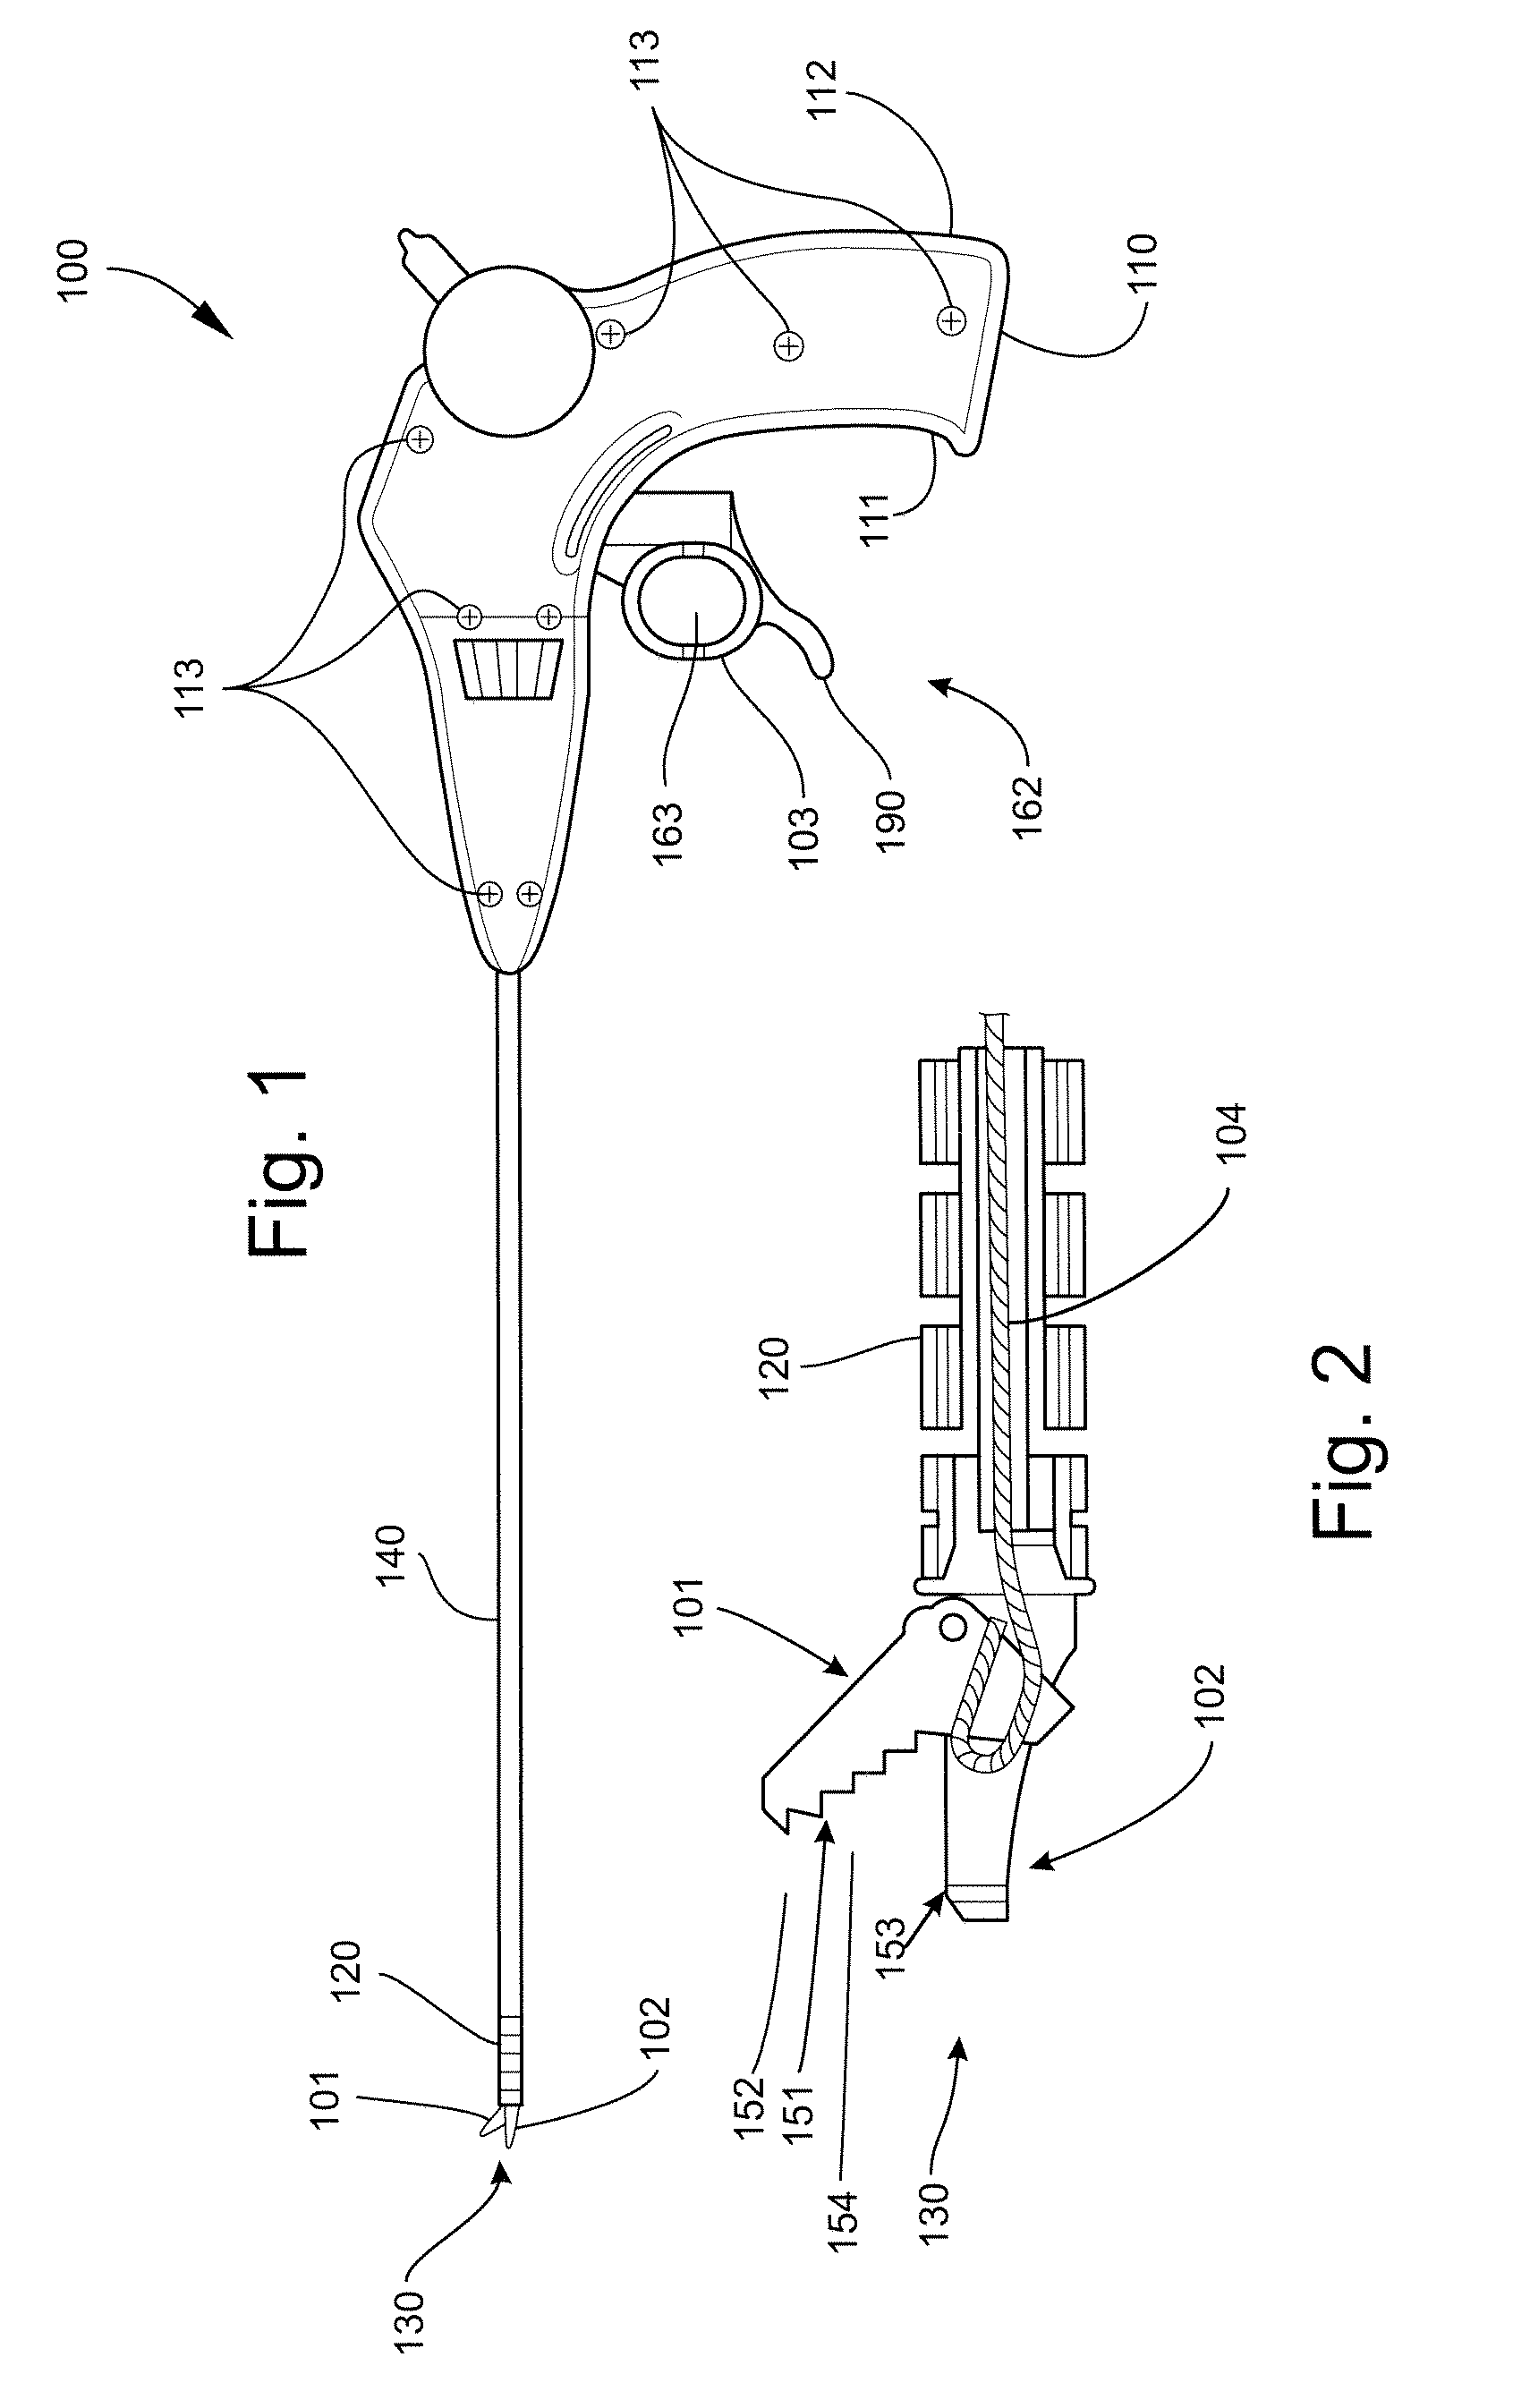 Method and Devices for Force-Limiting Trigger Mechanism